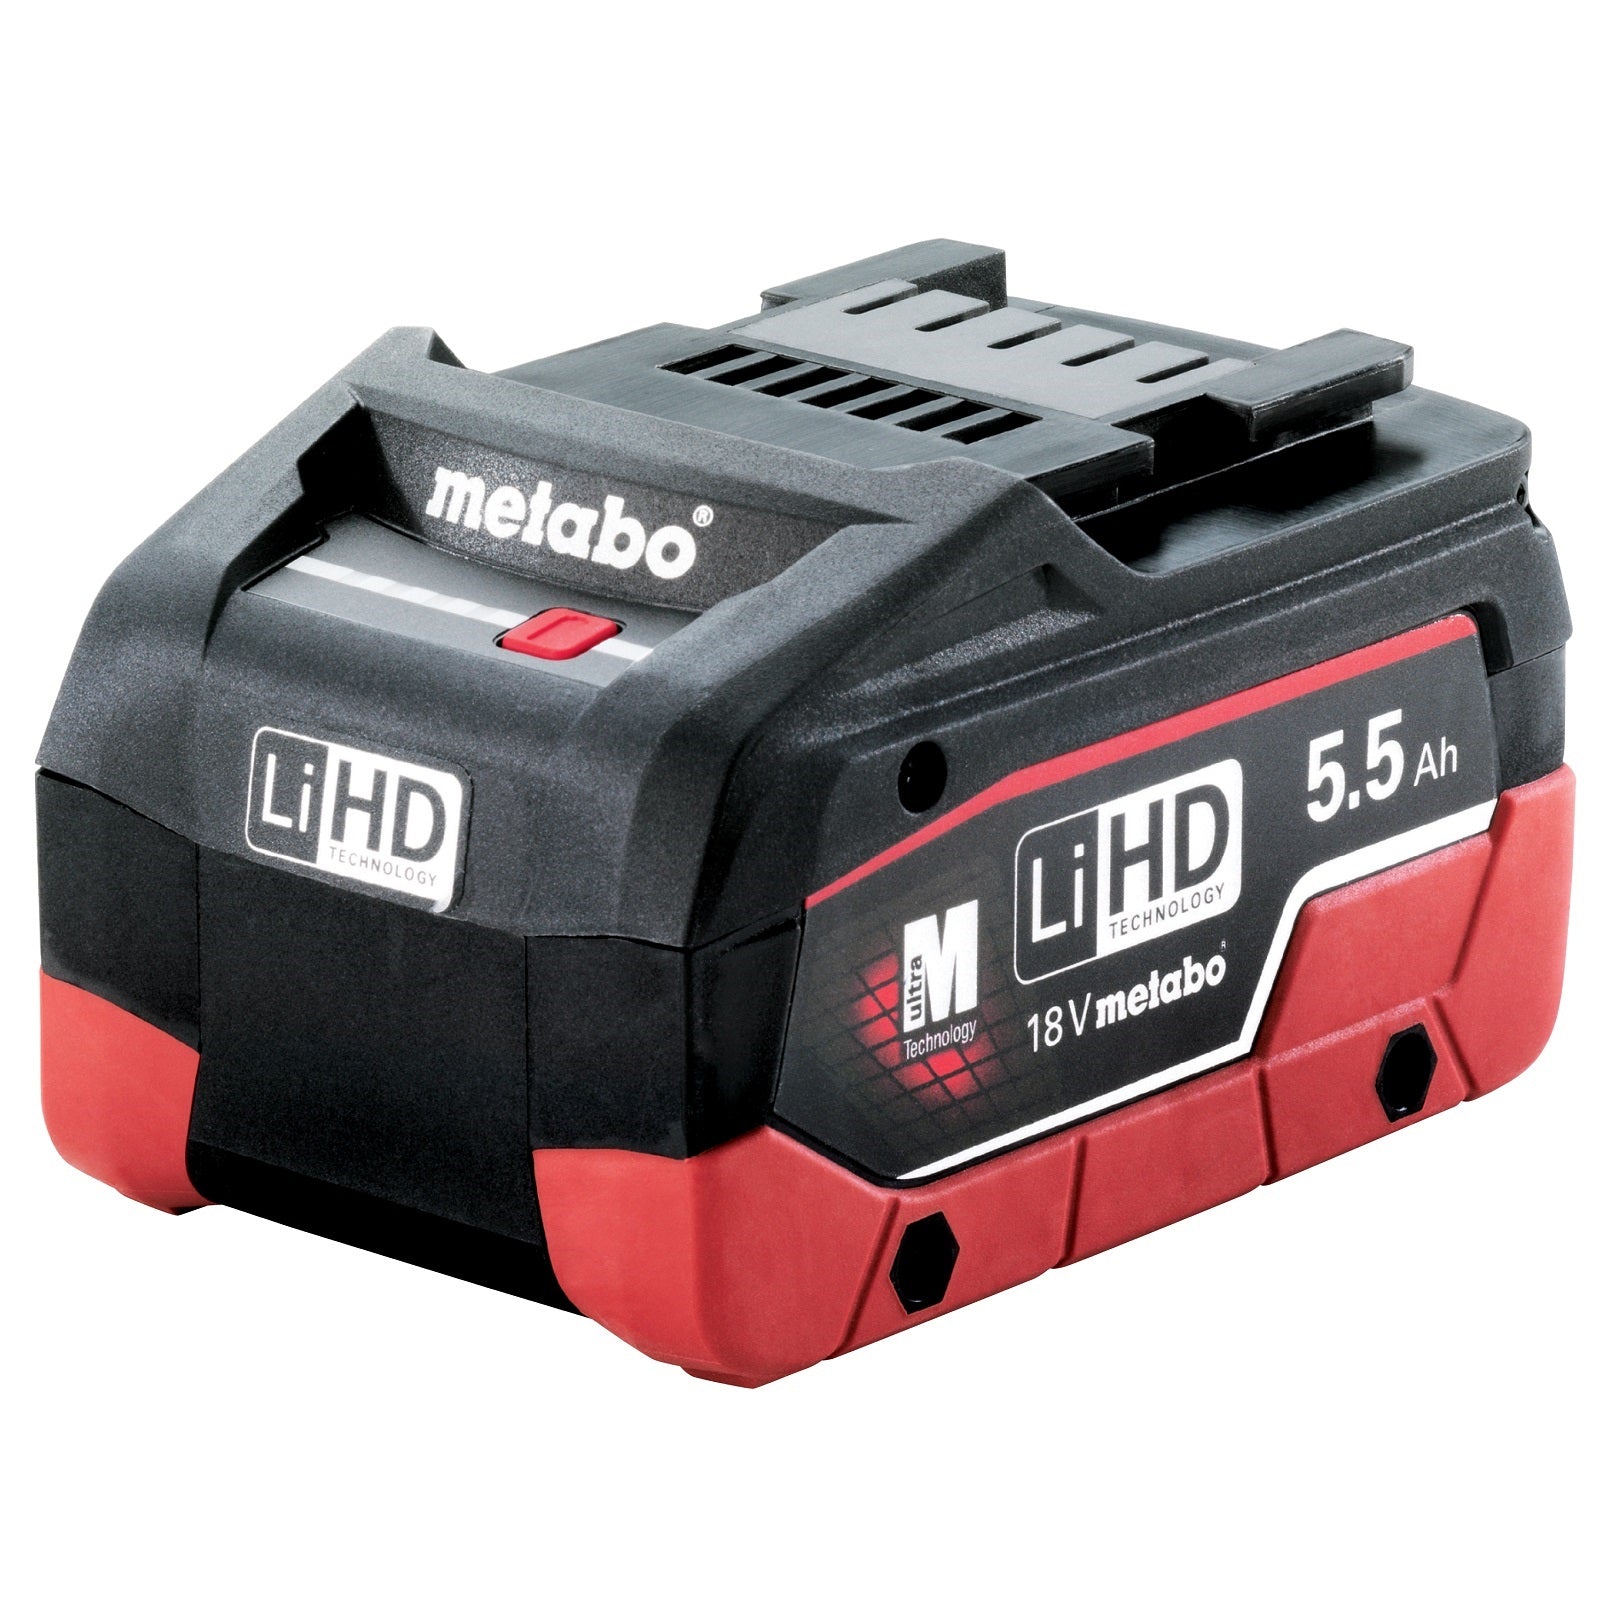 18V 5.5Ah 2Pce Brushless Hammer Drill + Impact Driver Combo Kit MET18BL2MB2HD5.5AF AU68200955 by Metabo